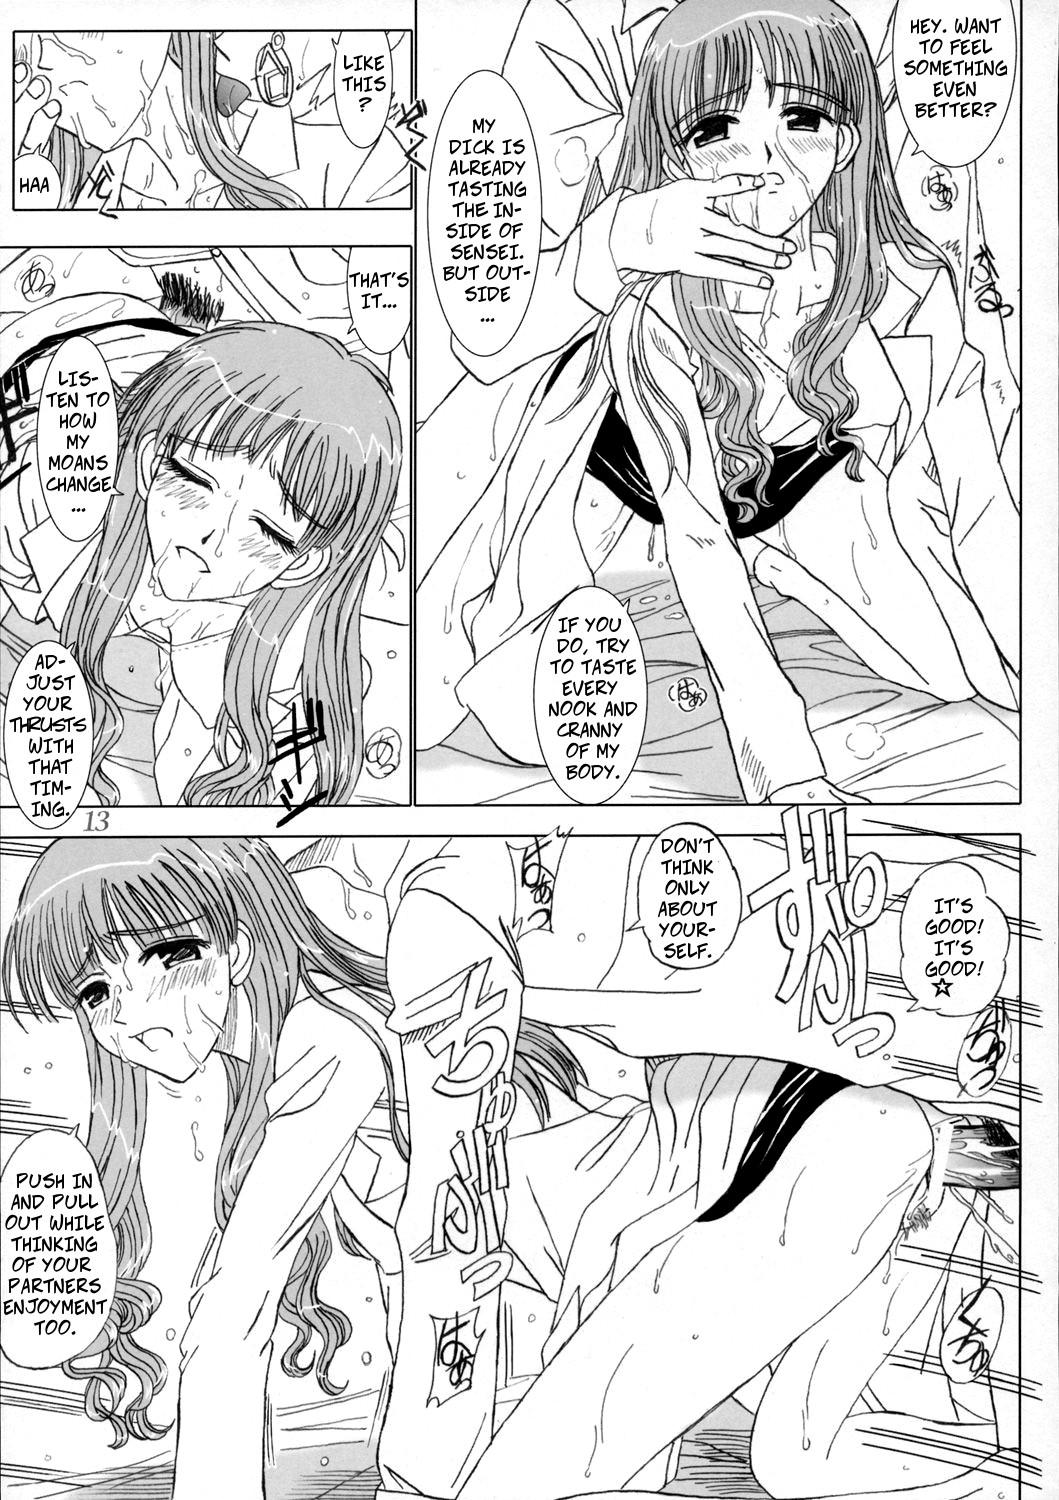 Big Dick Secret Lesson - School rumble Licking - Page 12